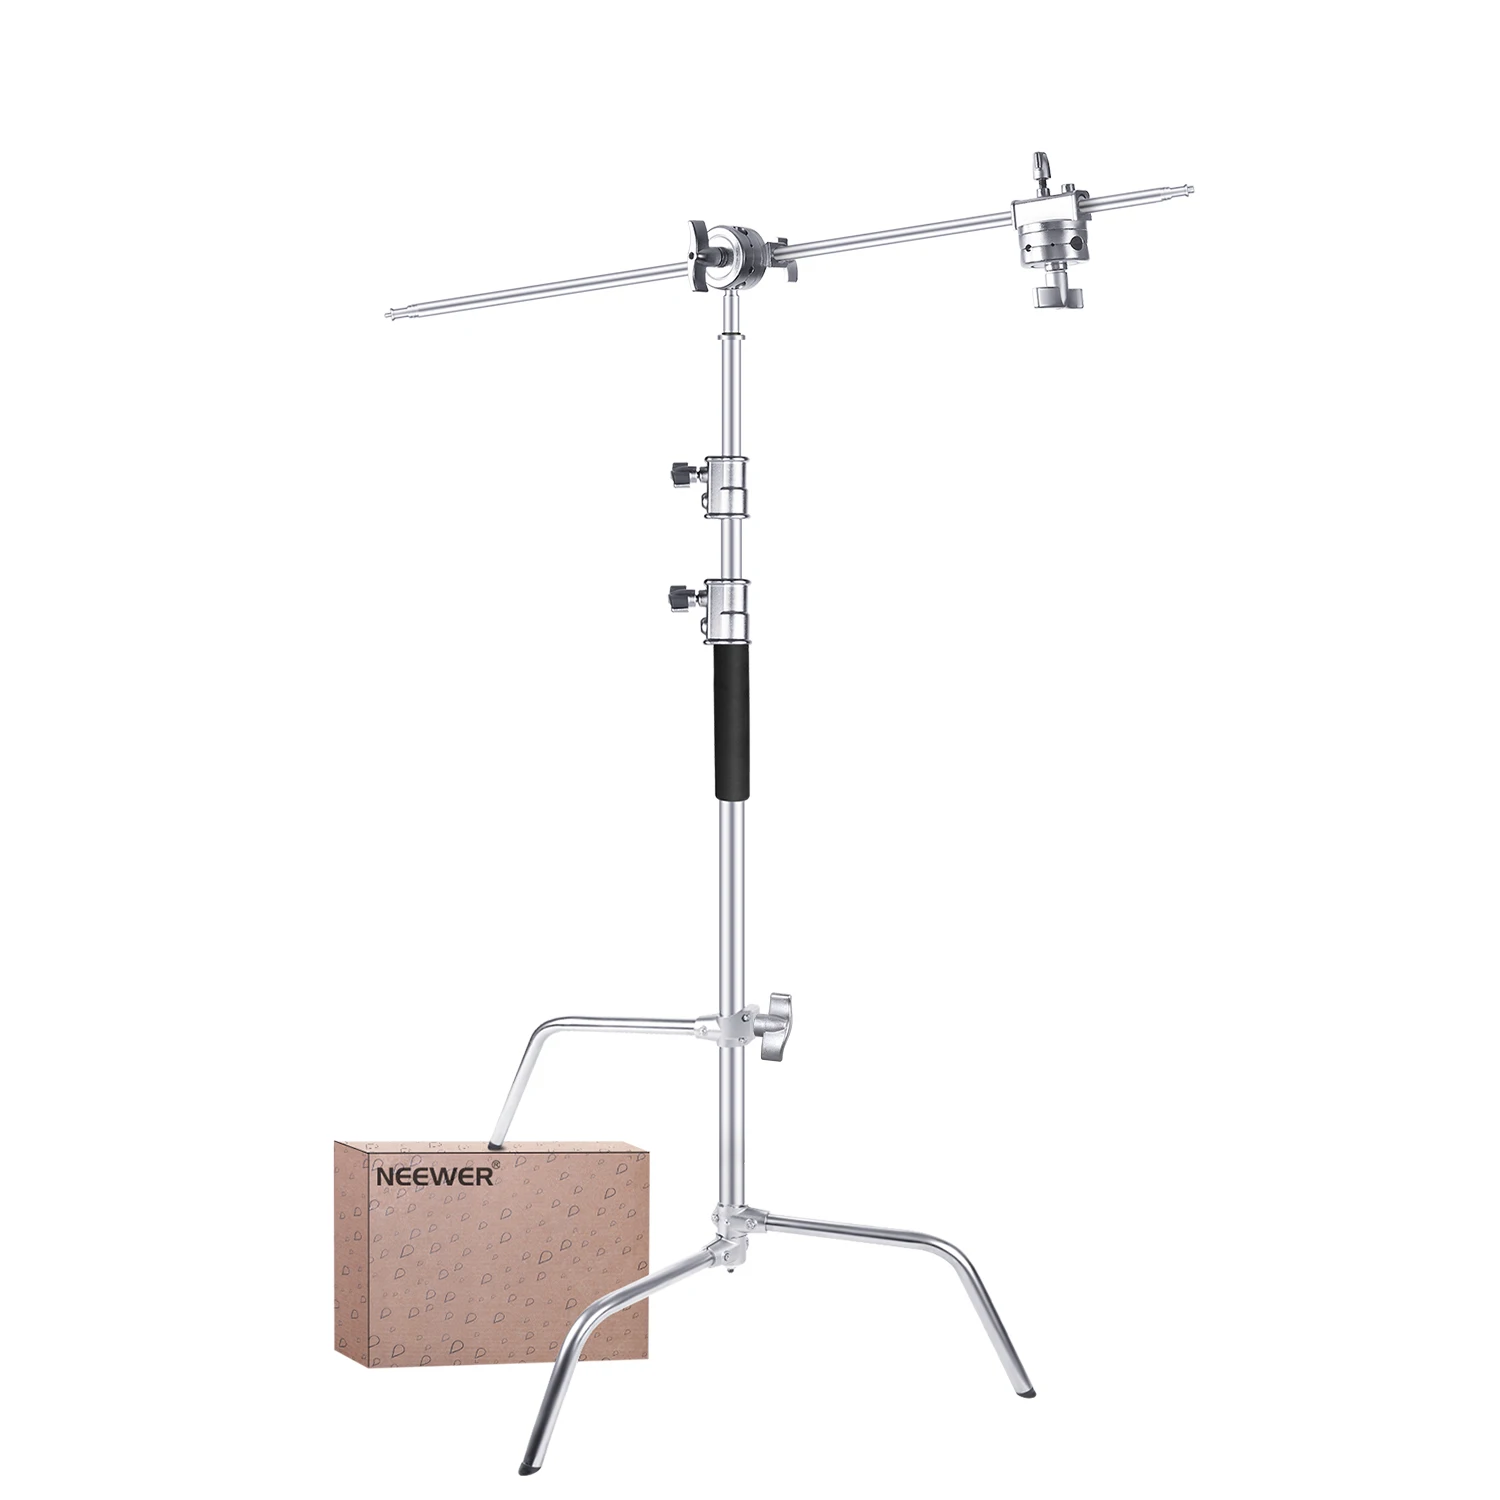 

NEEWER C Stand with Boom Arm & Sliding Legs, Pro 100% Stainless Steel Stand Max Height 10.13ft/309cm with 3.9ft/120cm Arm